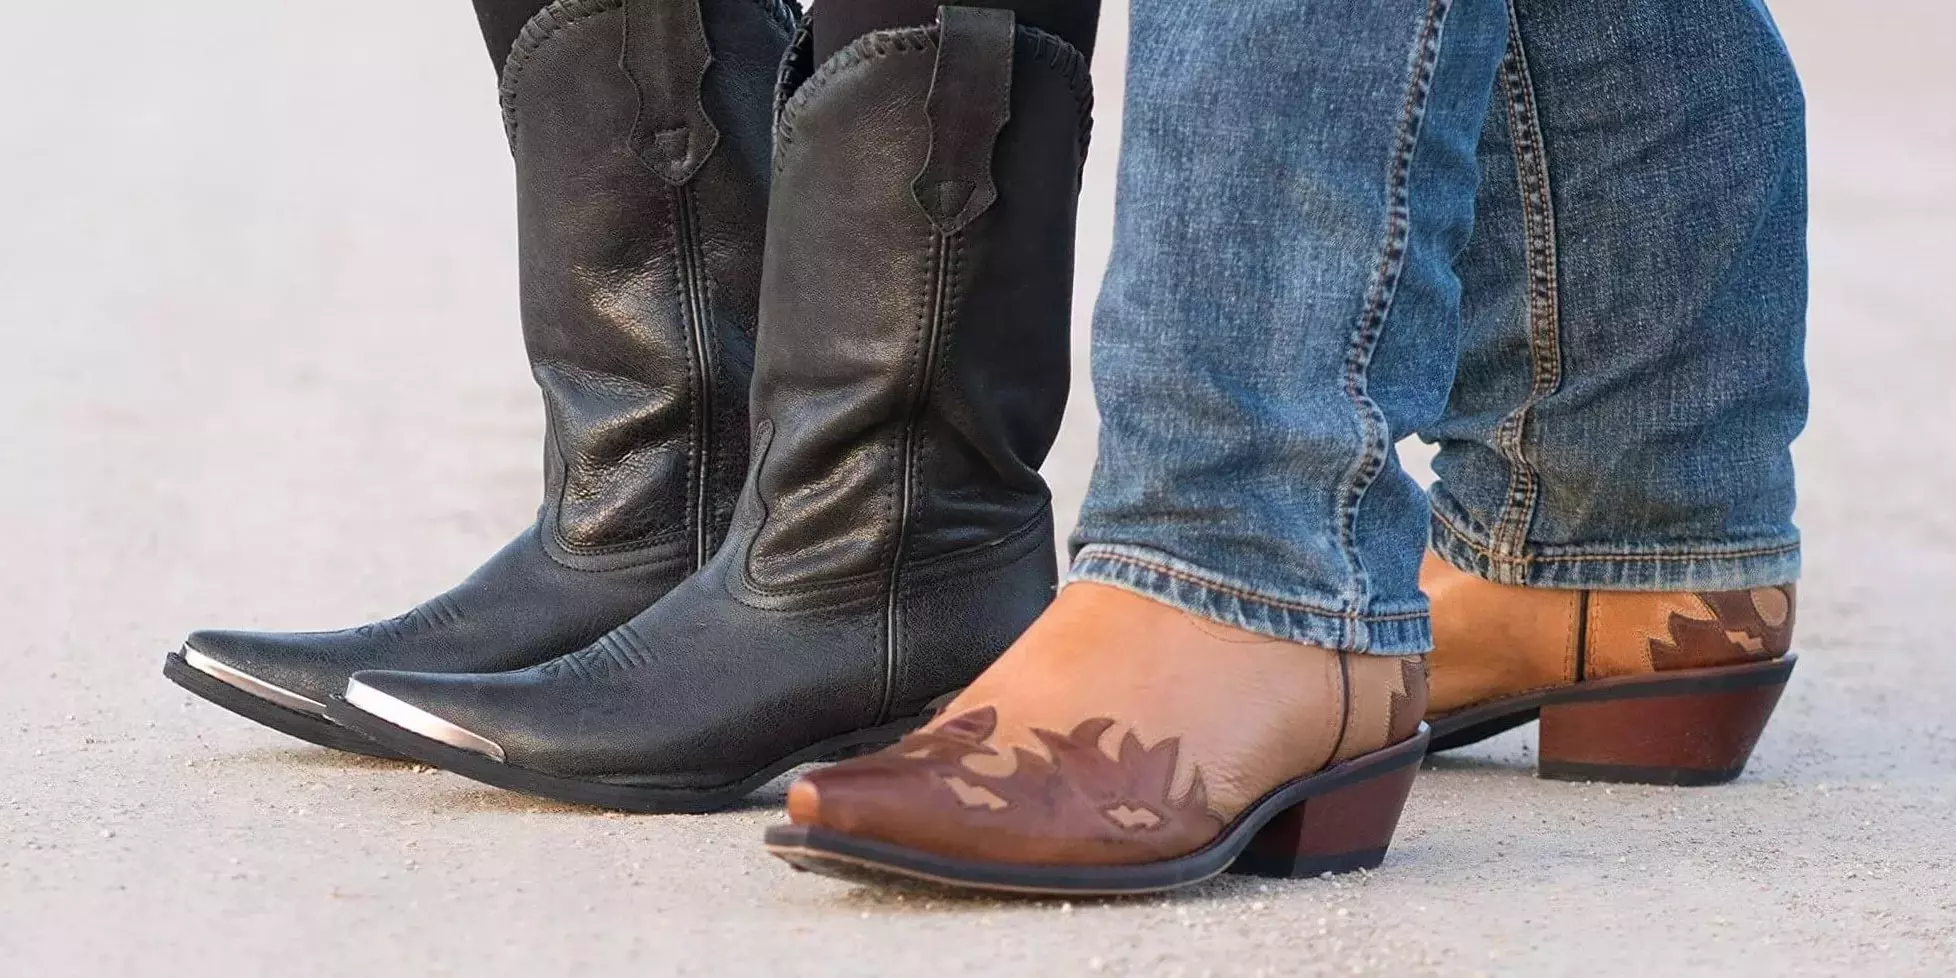 You're wearing the WRONG SIZE JEANS with COWBOY BOOTS 